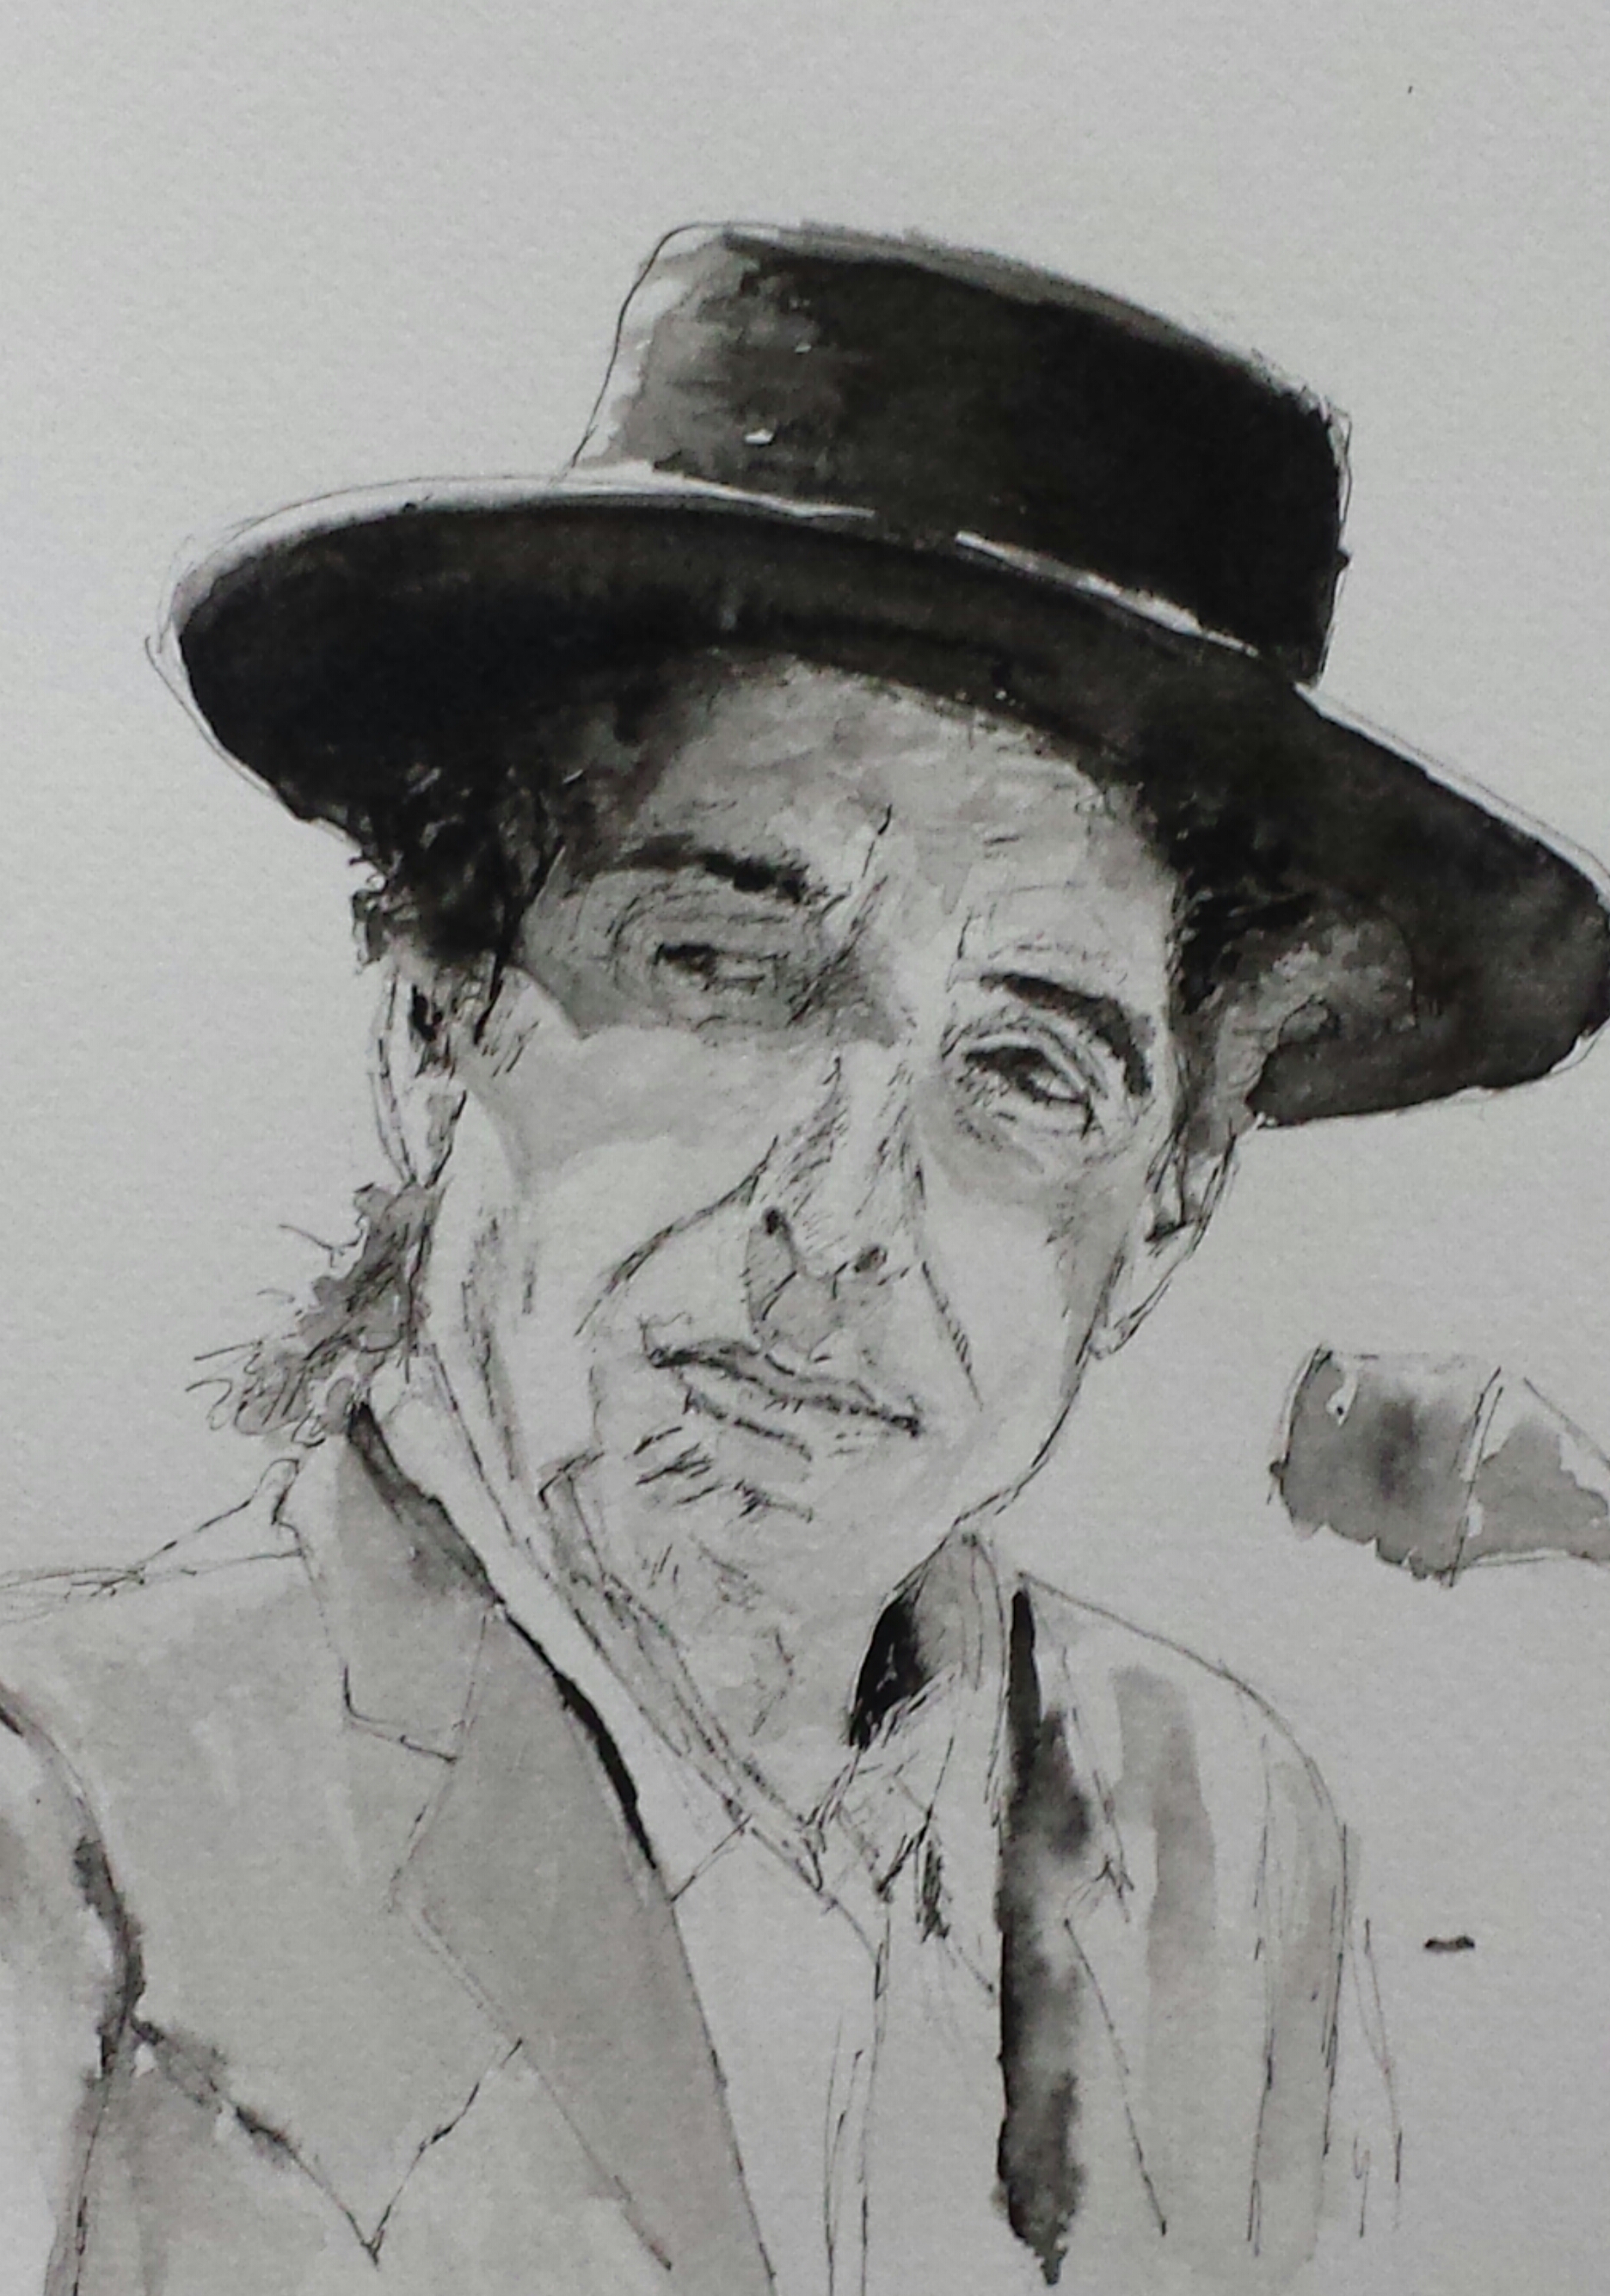 Dylan, 2016, pen and wash.